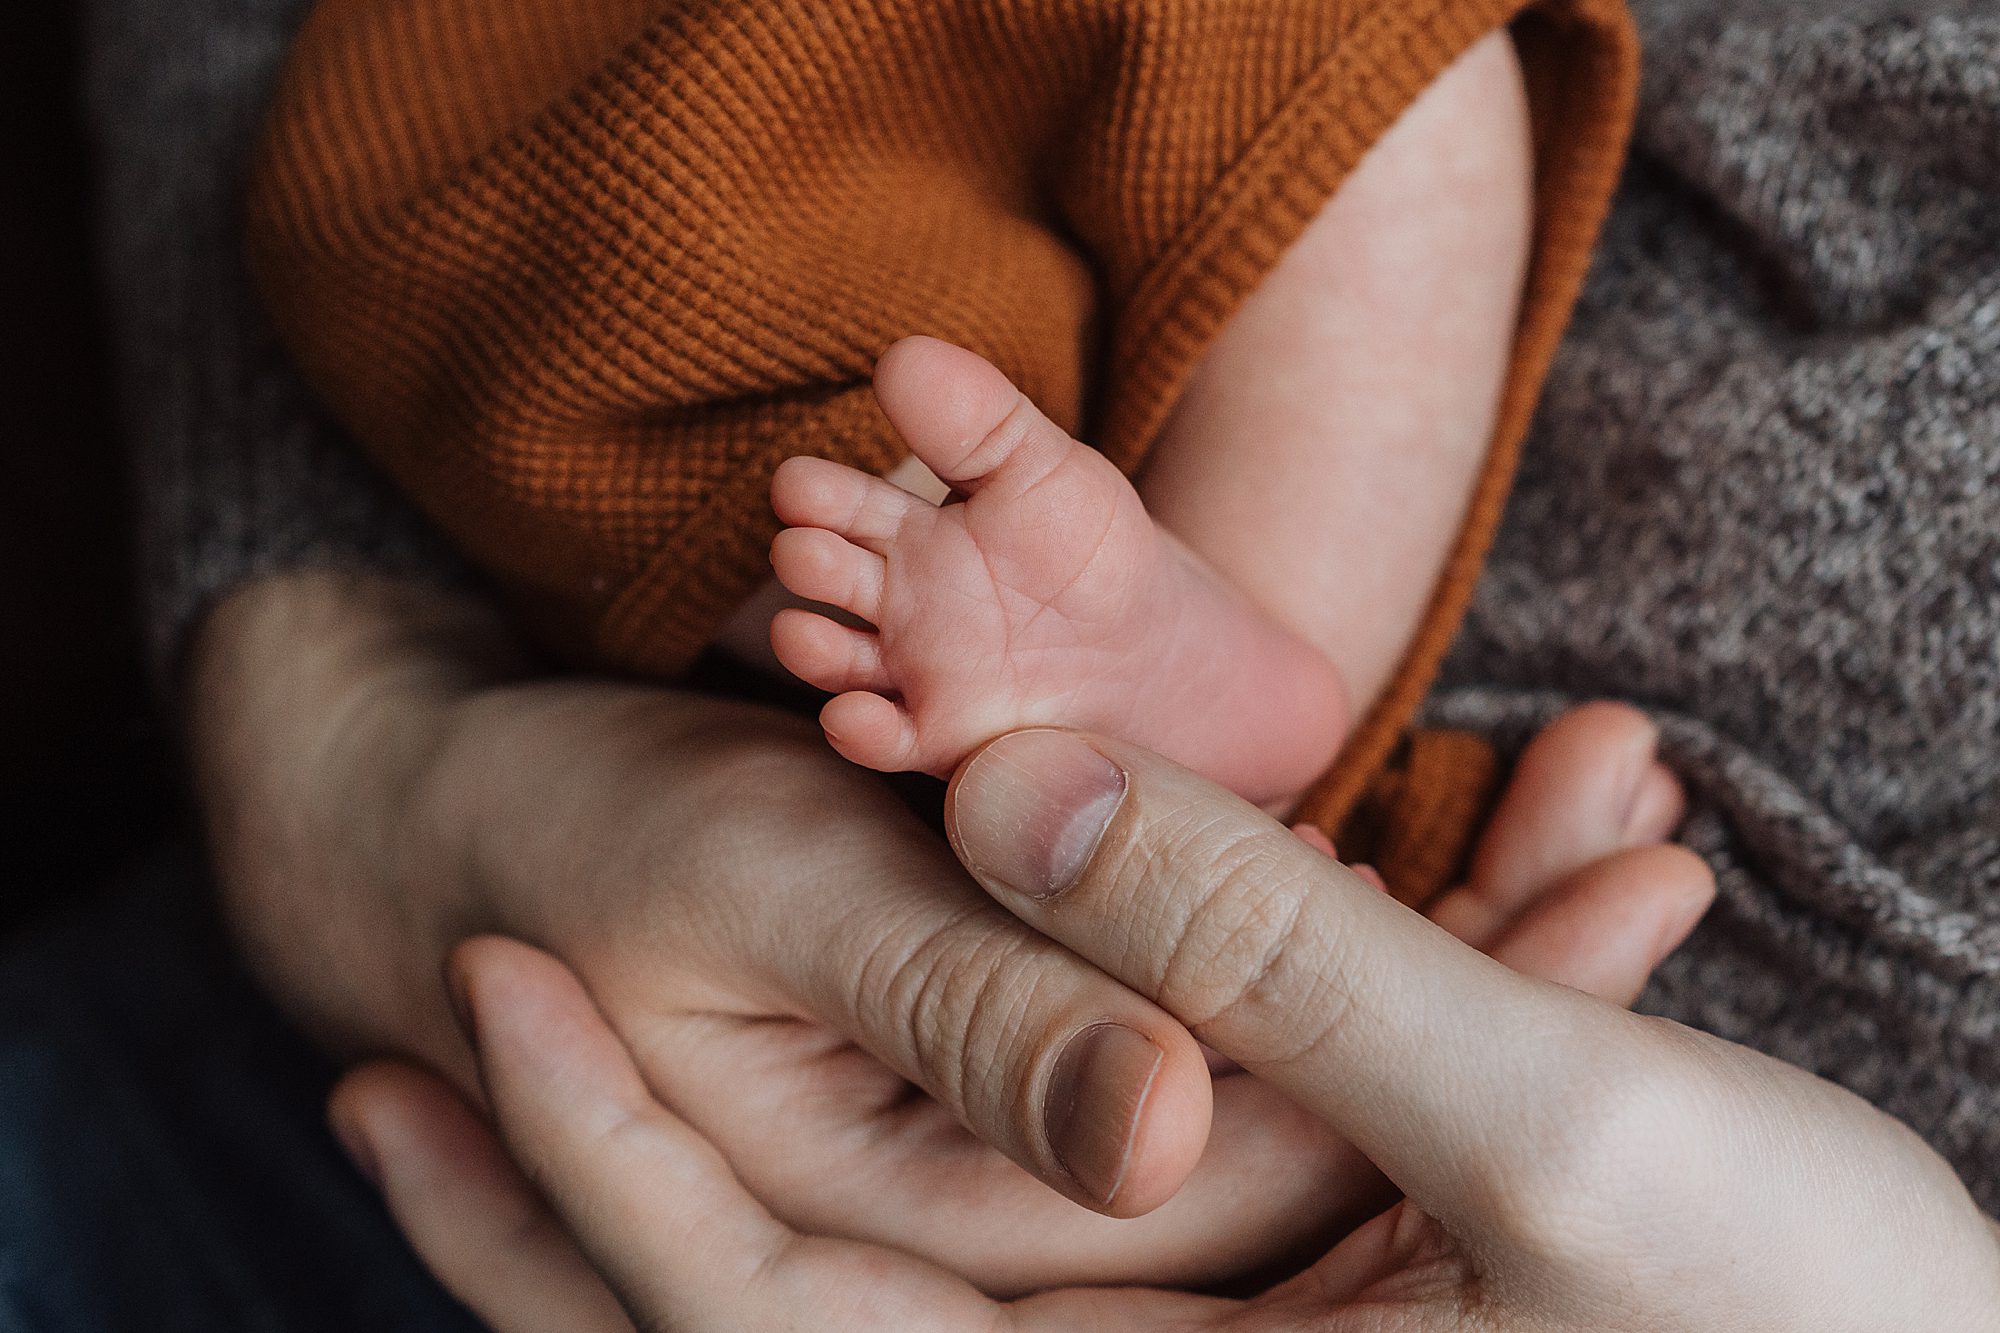 An adult's hands cradling a baby's tiny, bare foot.